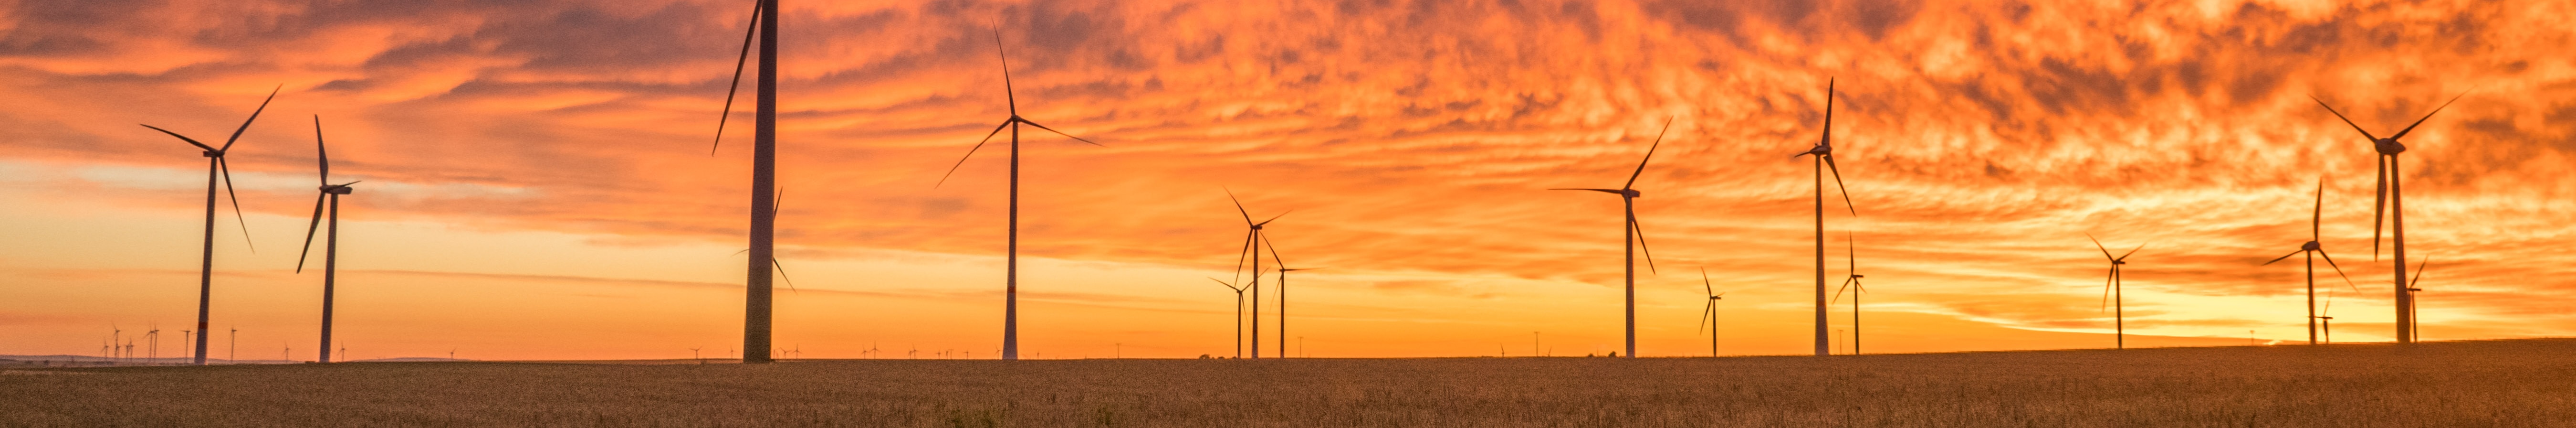 EDF's new wind farms in South Africa and Saudi Arabia provide electricity to 92,400 homes as of 2022